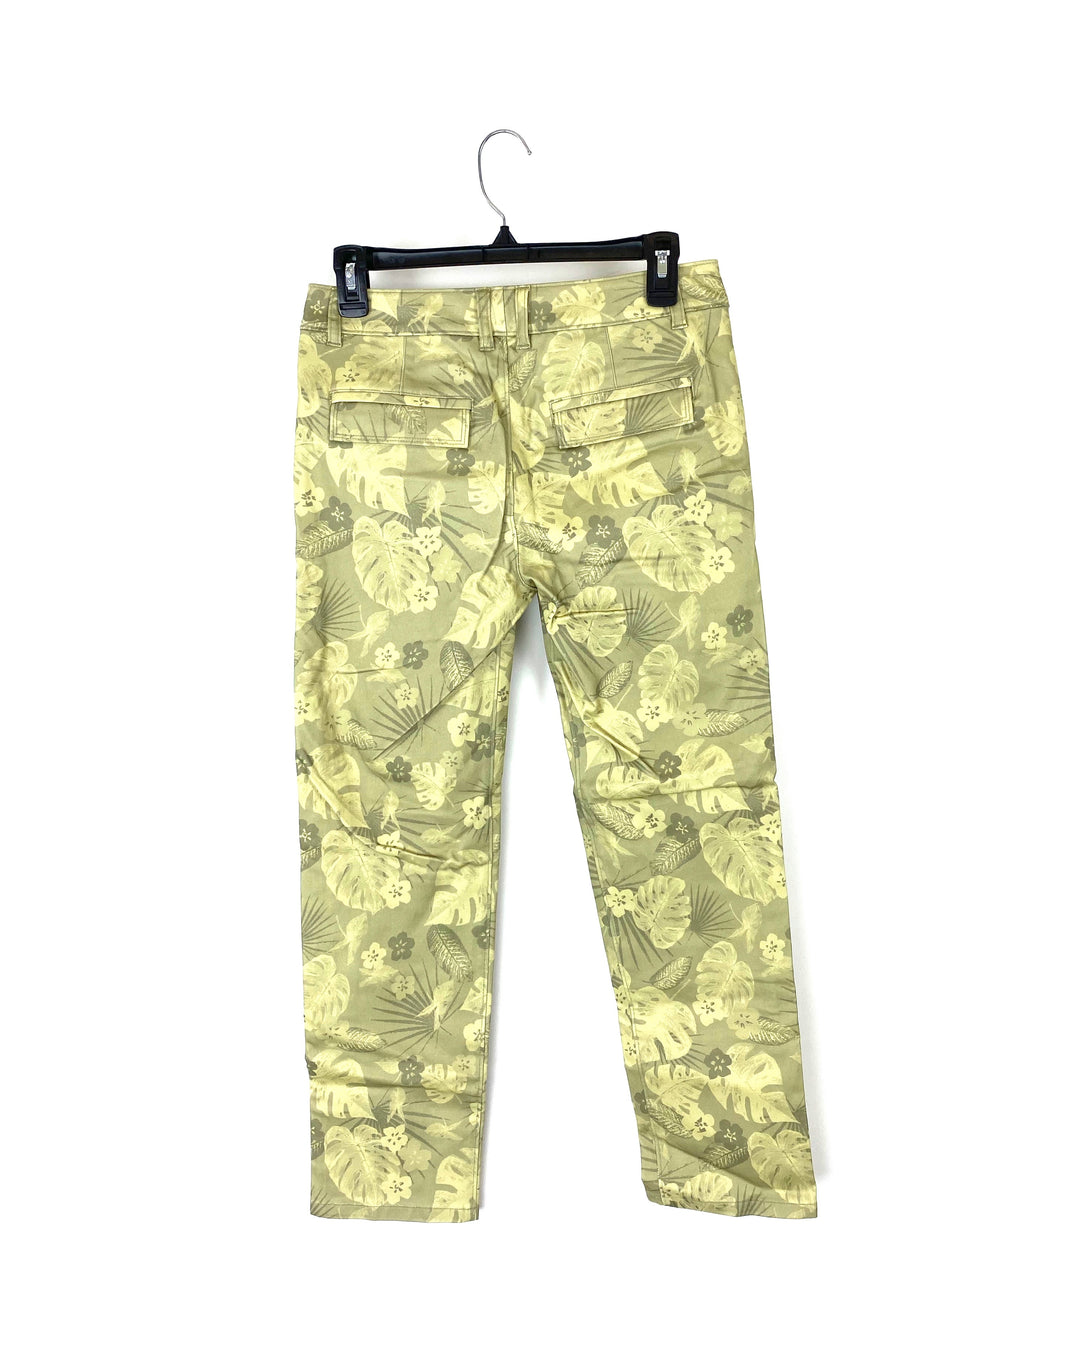 Green Flower and Leaf Pattern Pants - Small